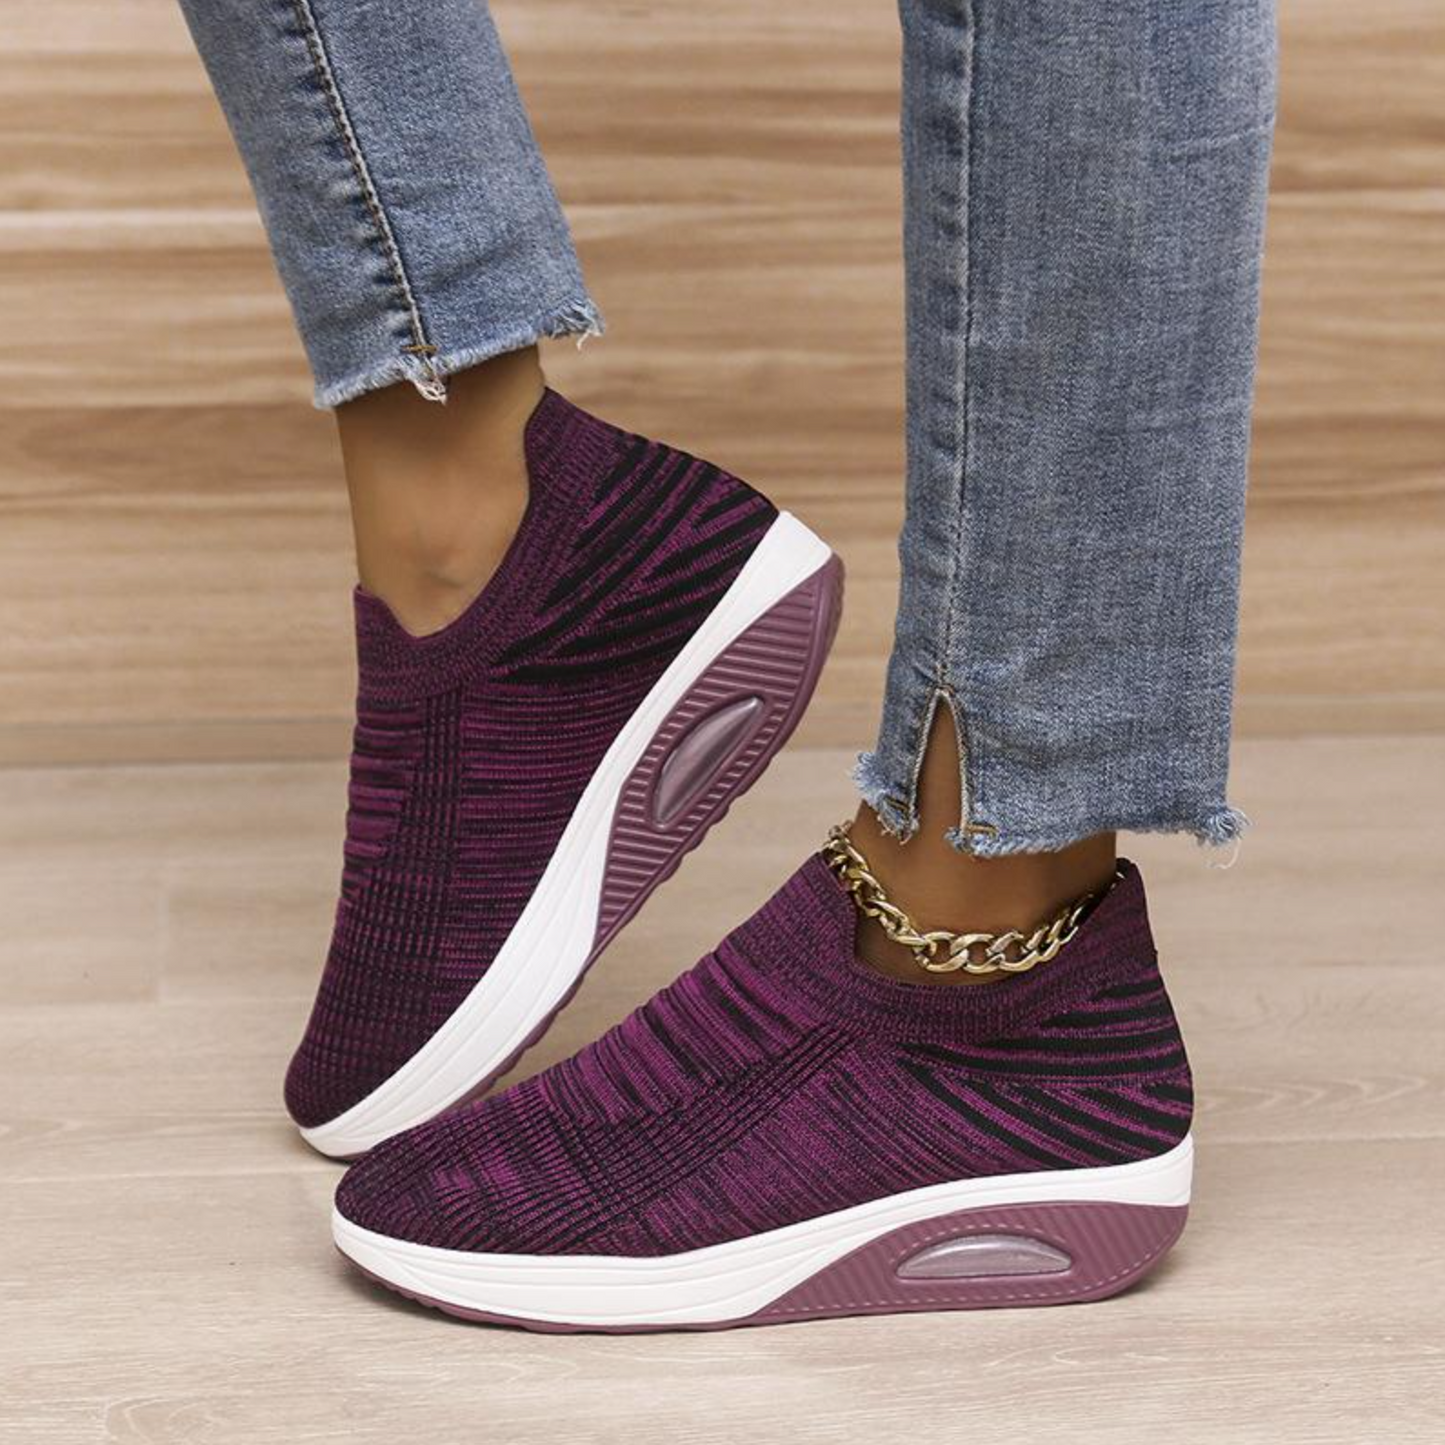 🔥Ladies Fashion Casual Sneakers, Orthopedic Comfy Walking Shoes🔥